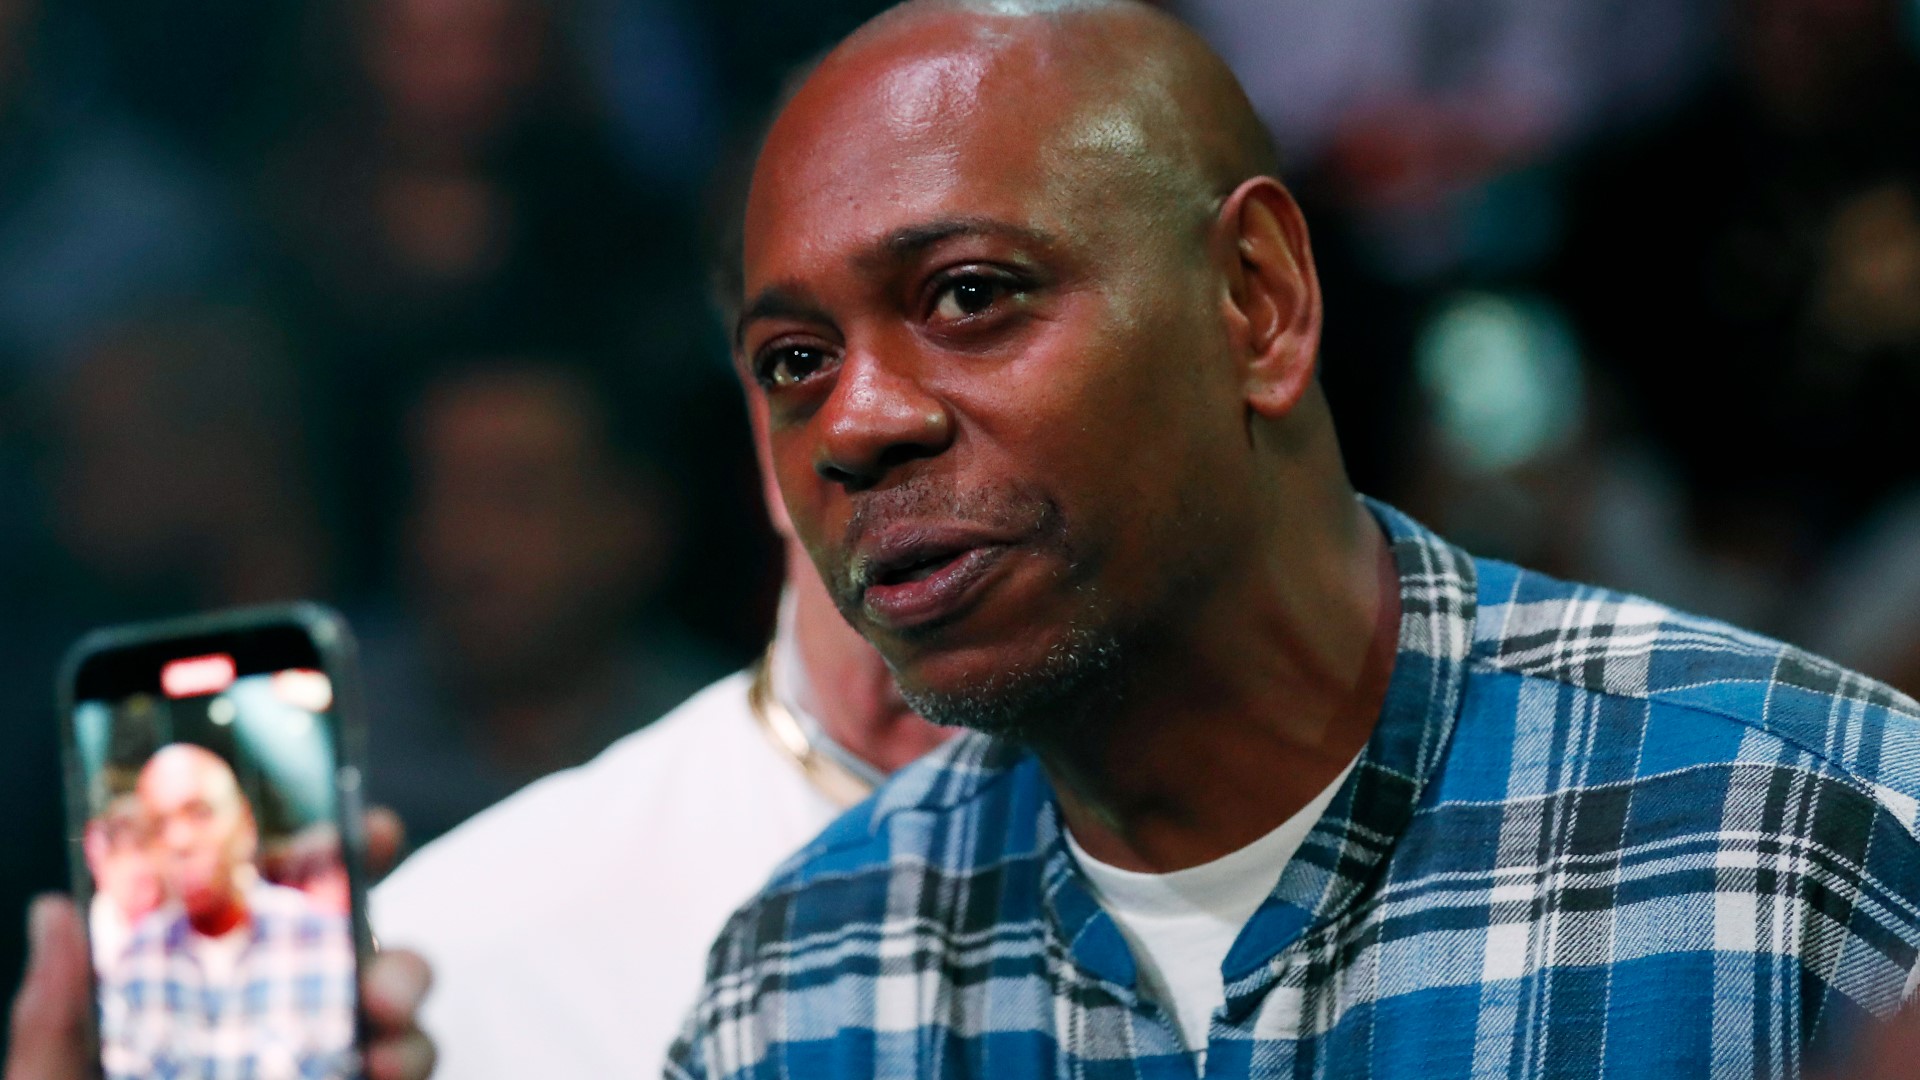 According to posts on Twitter, fans say Chappelle told jokes that were deemed offensive to the LGBTQ community.